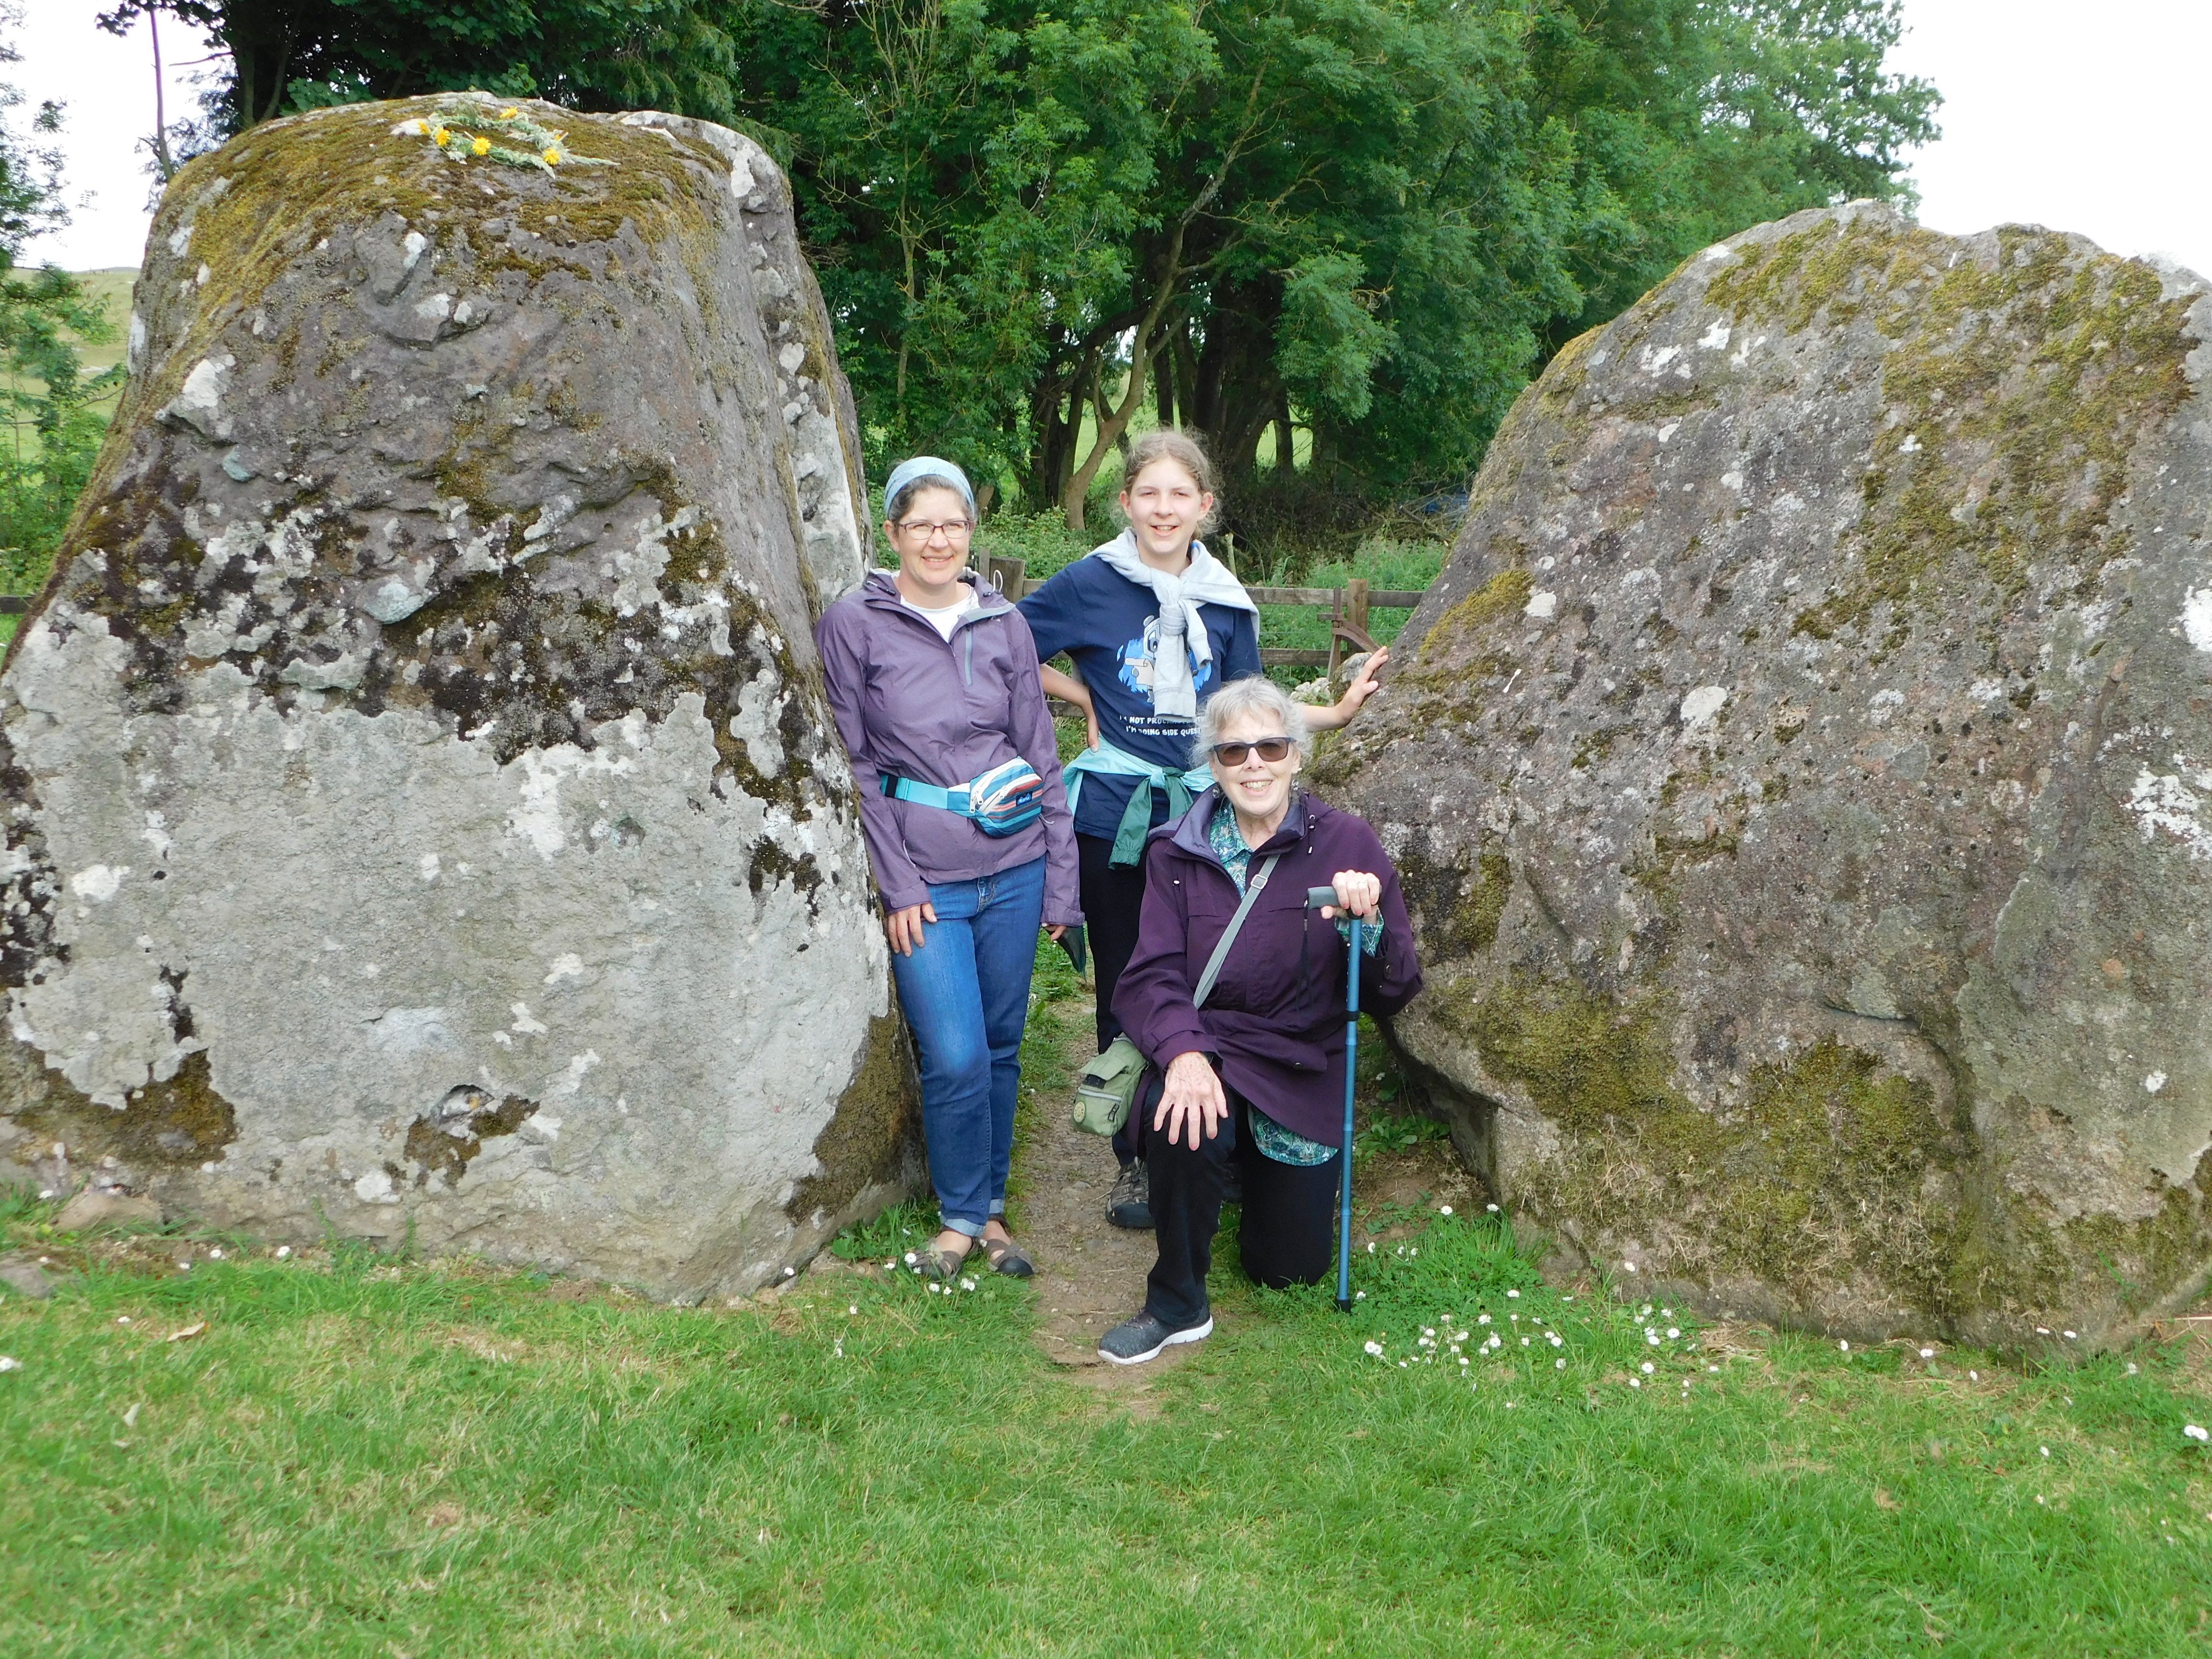 Rachael, Ben and Kate at the Grange Stone Circle which has 113 standing stones and was built circa 2,200 B.C. near Lough Gur, Co. Limerick.